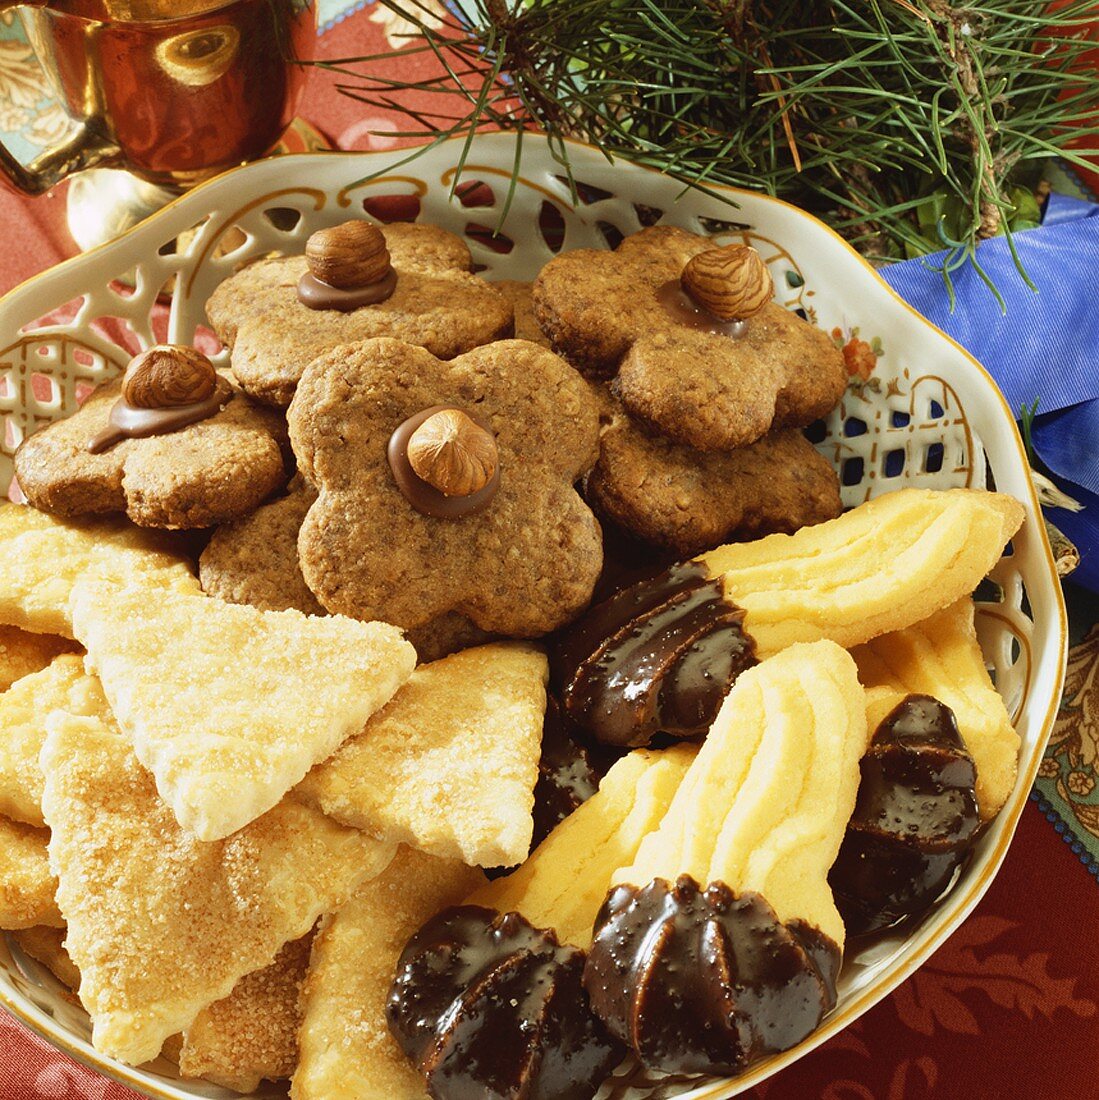 Bowl of chocolate nut biscuits, cinnamon triangles & sweet 'paws'